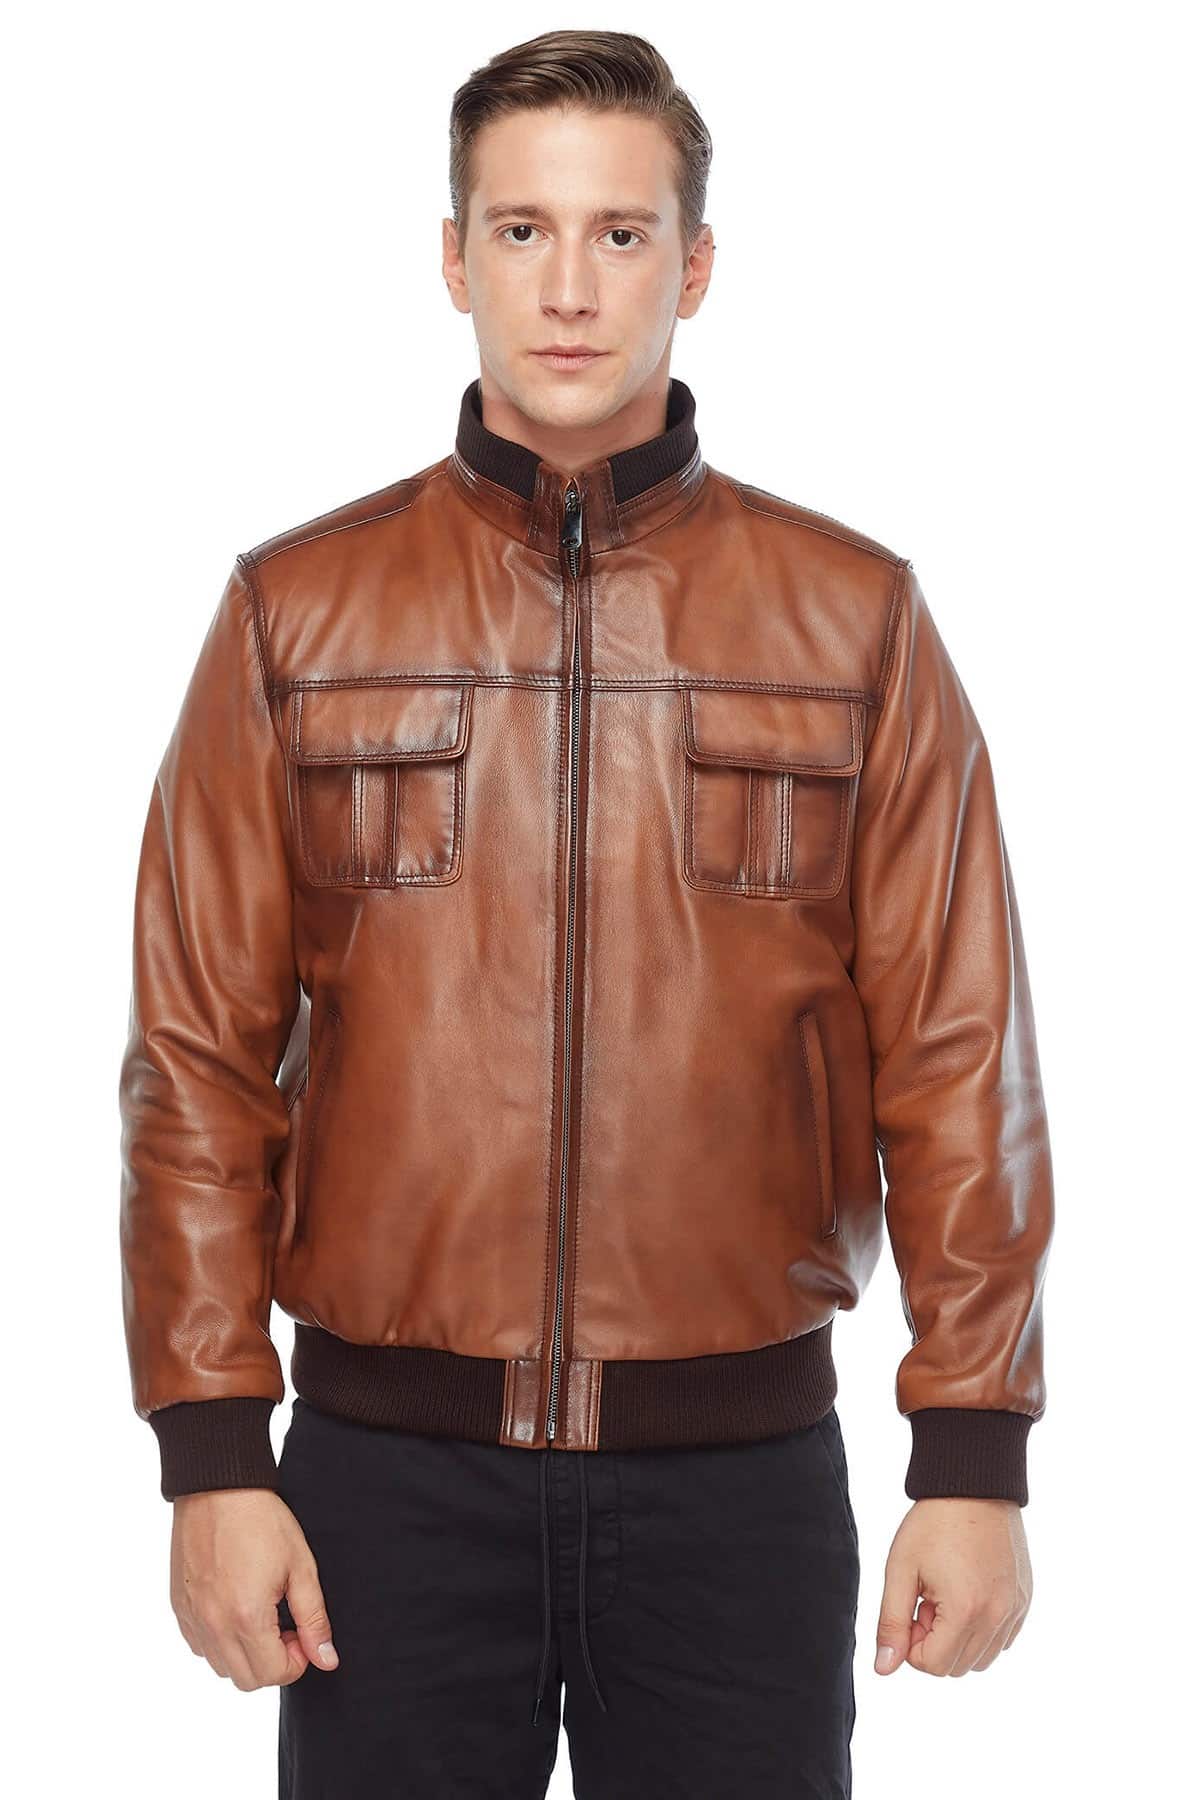 Fiennes Tiffin Tan Real Leather Bomber Jacket2